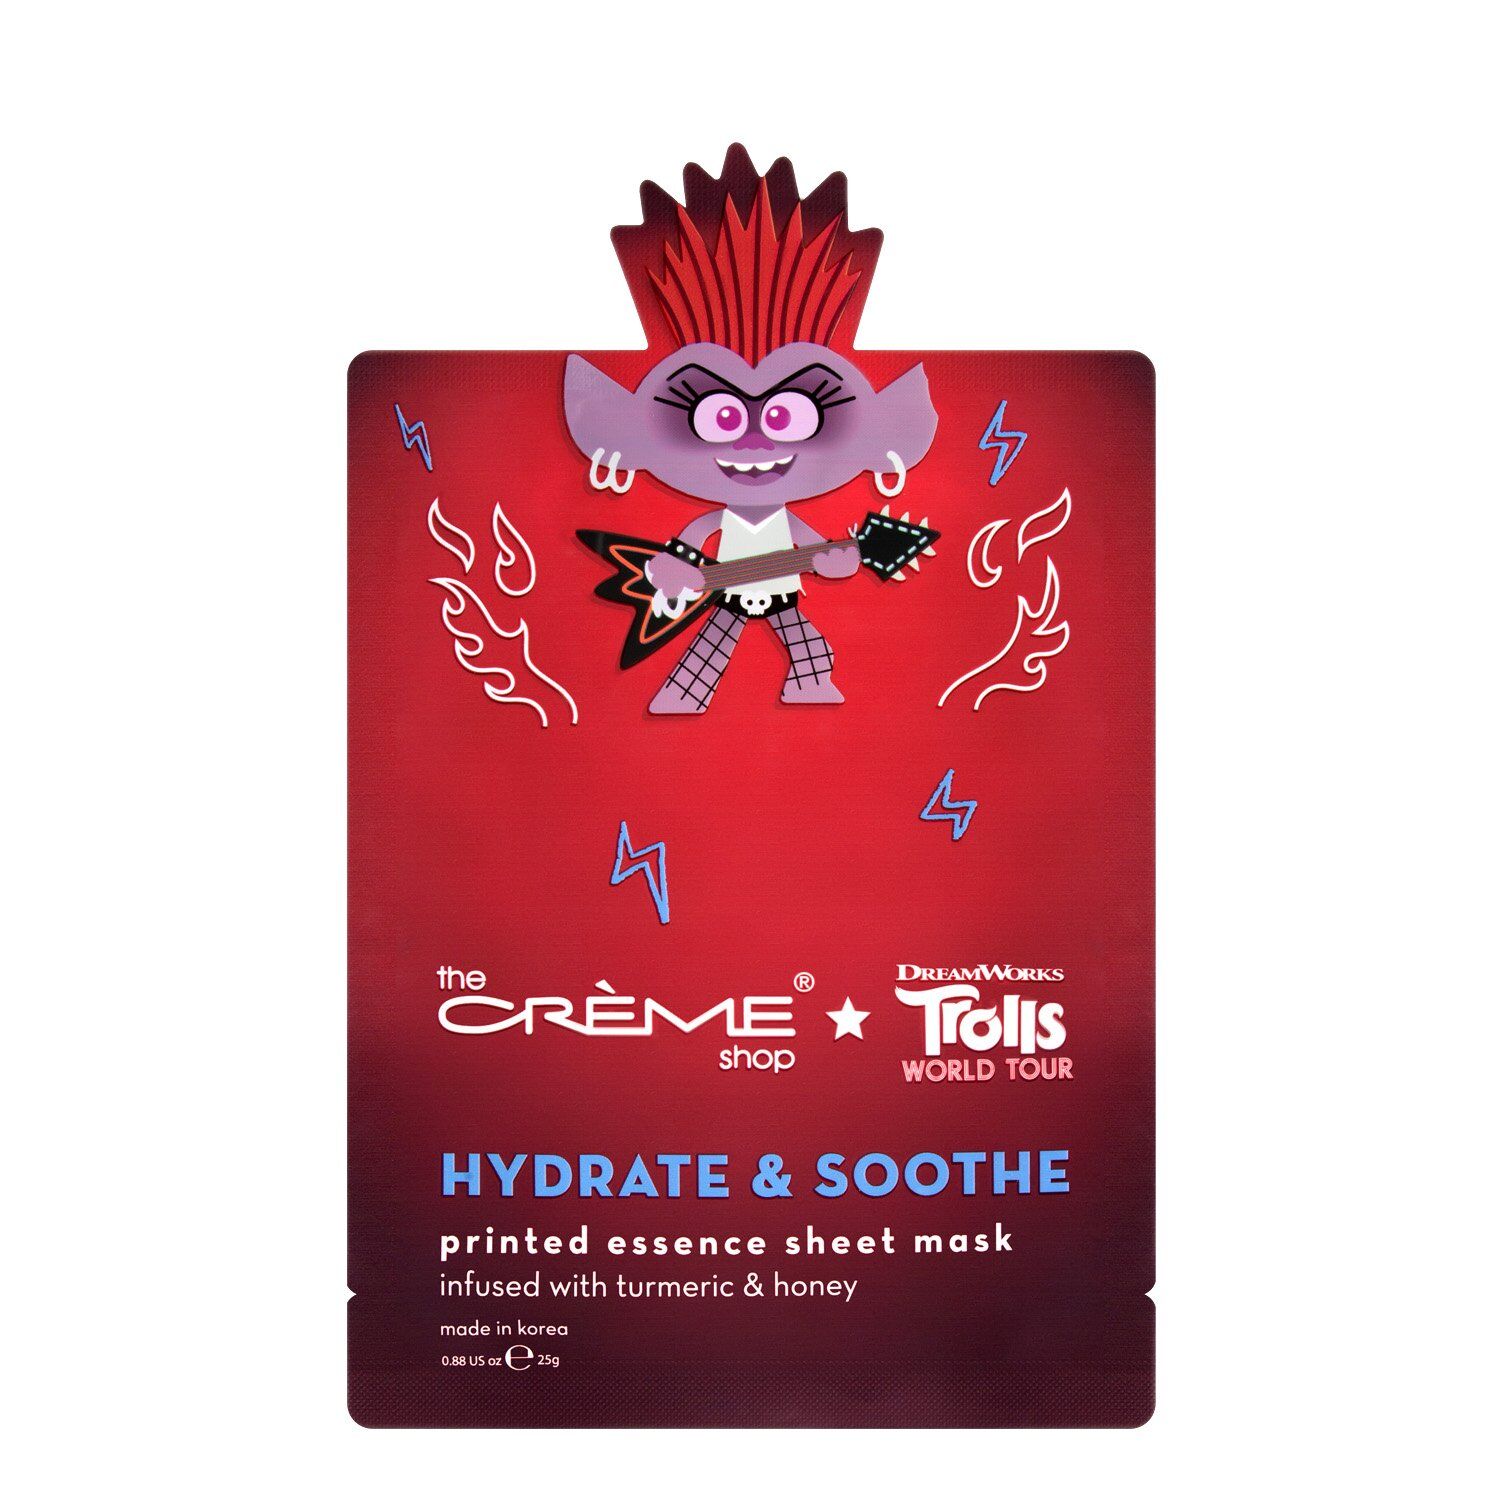 The Crème Shop x Trolls - Queen Barb Hydrate & Soothe Essence Sheet Mask